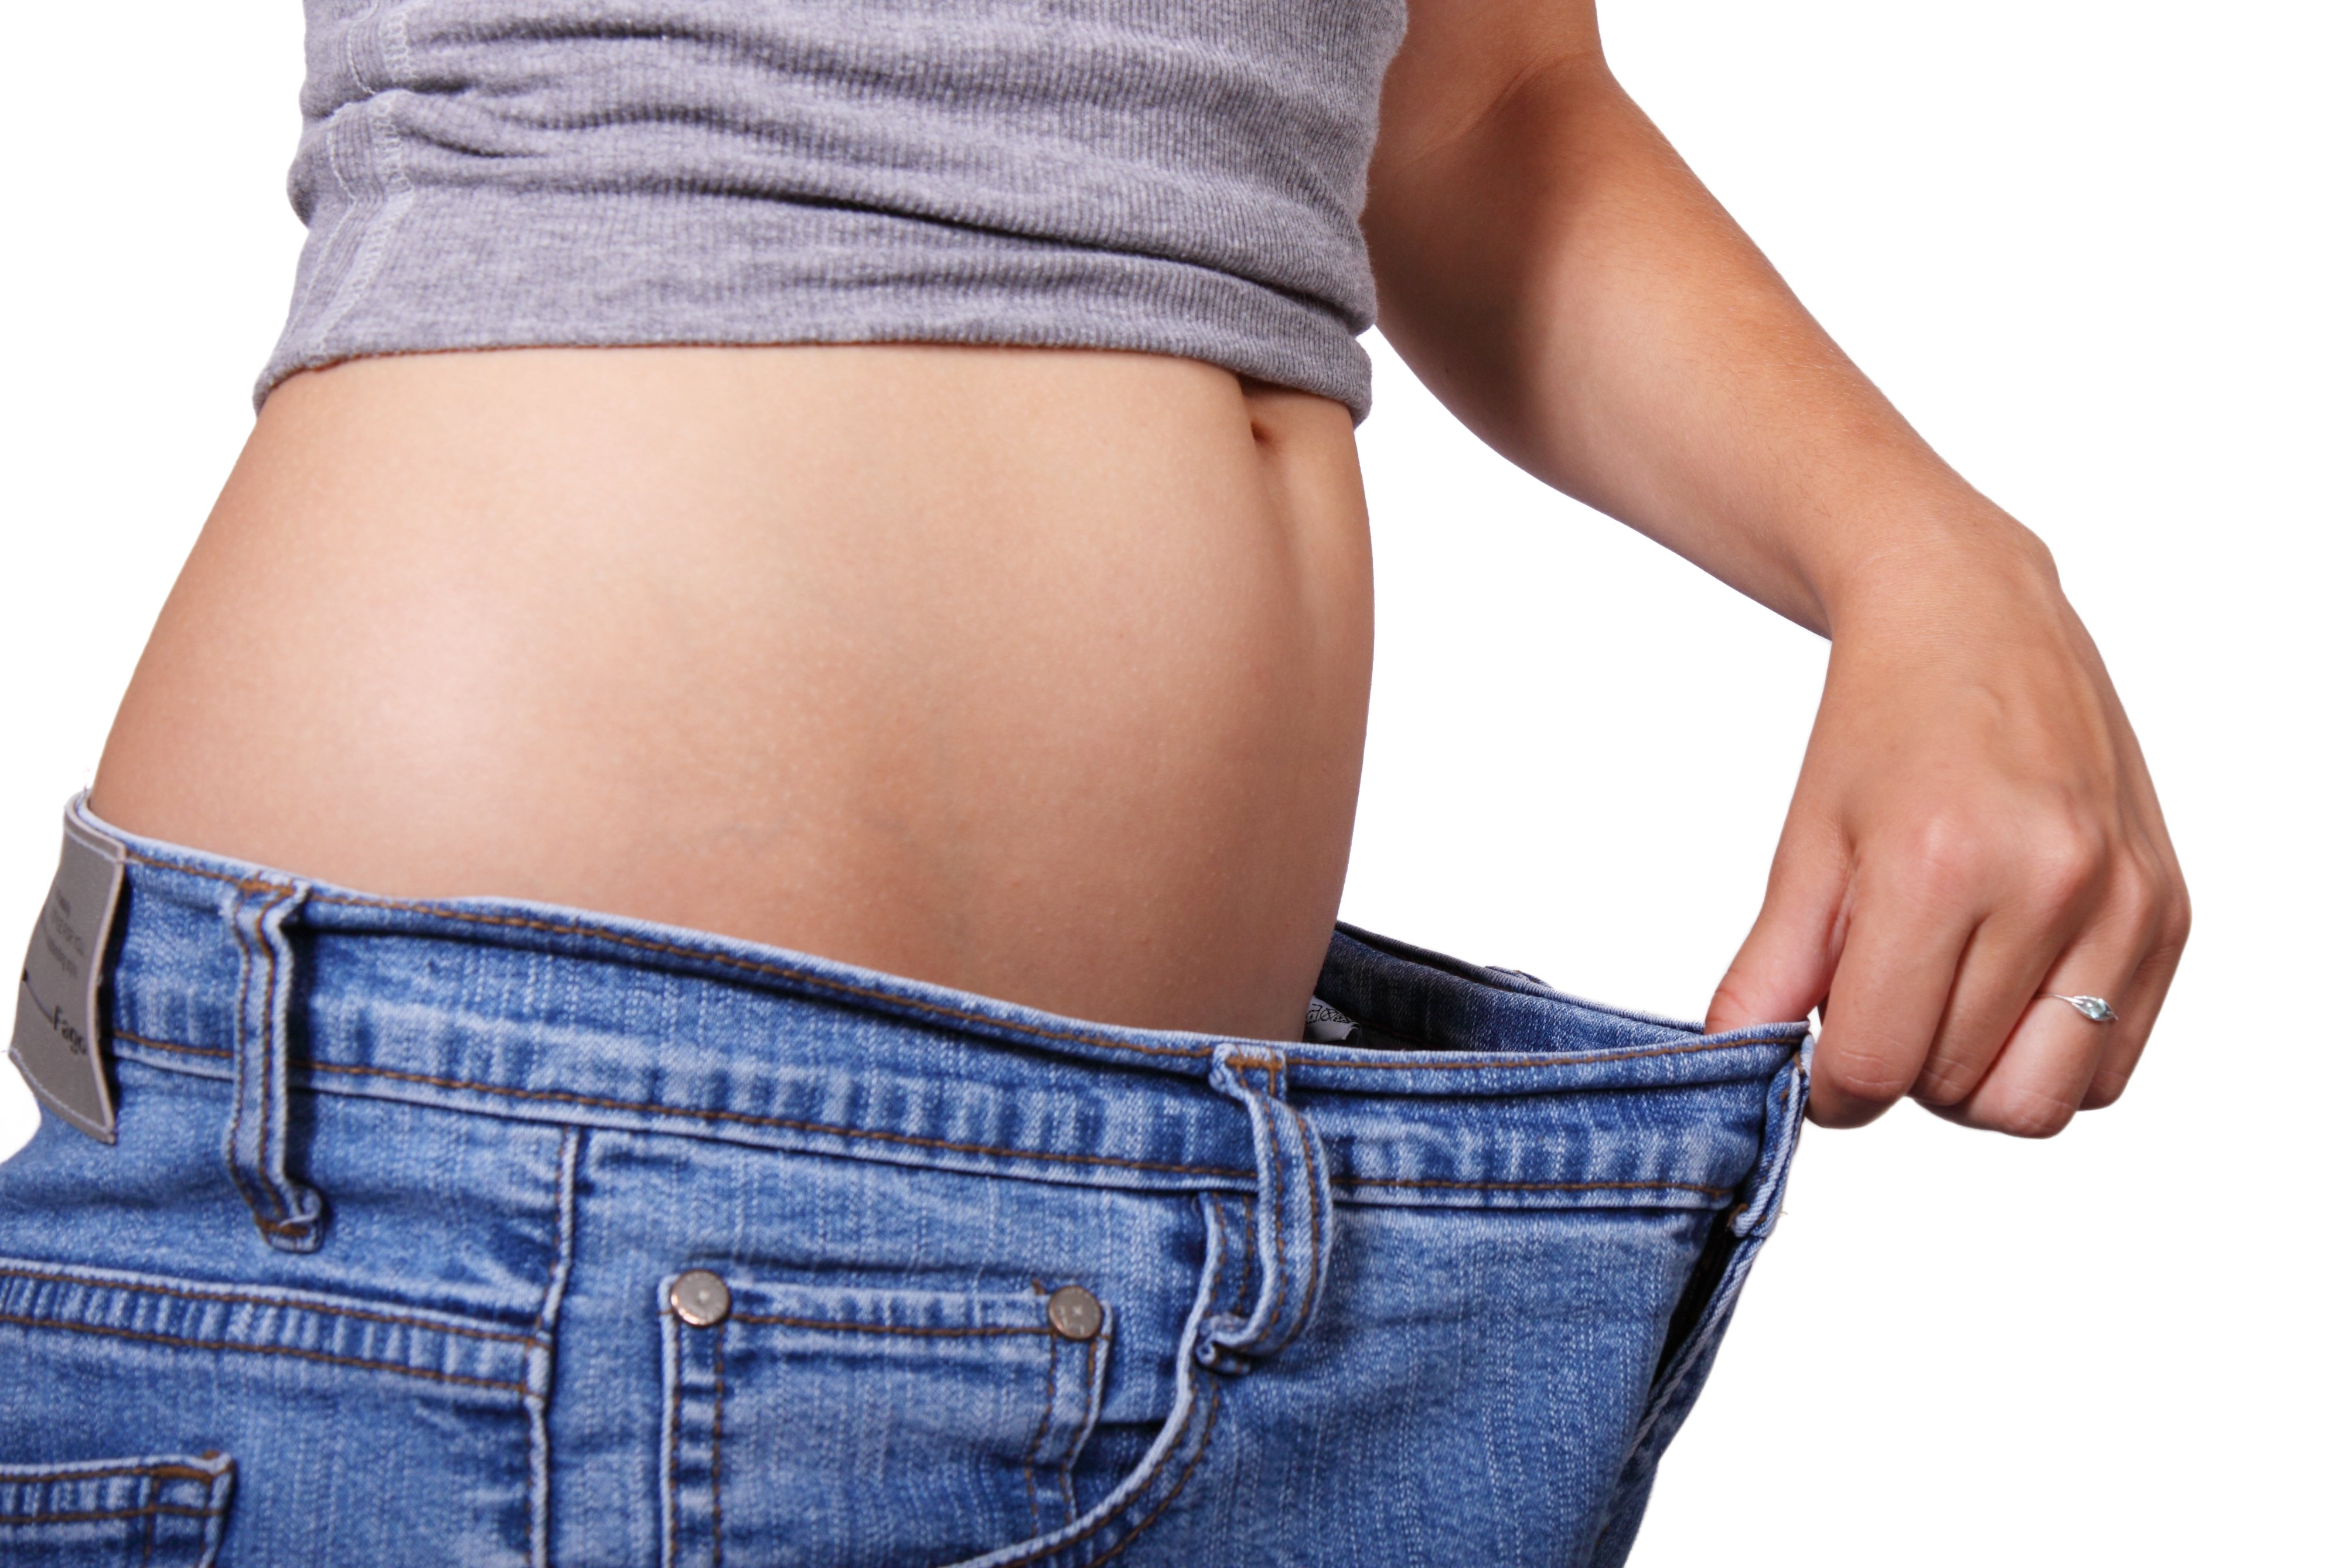 EFFECTIVE LAZY DIET OR HOW TO LOSE 40 POUNDS AND GET THE BODY OF YOUR DREAMS